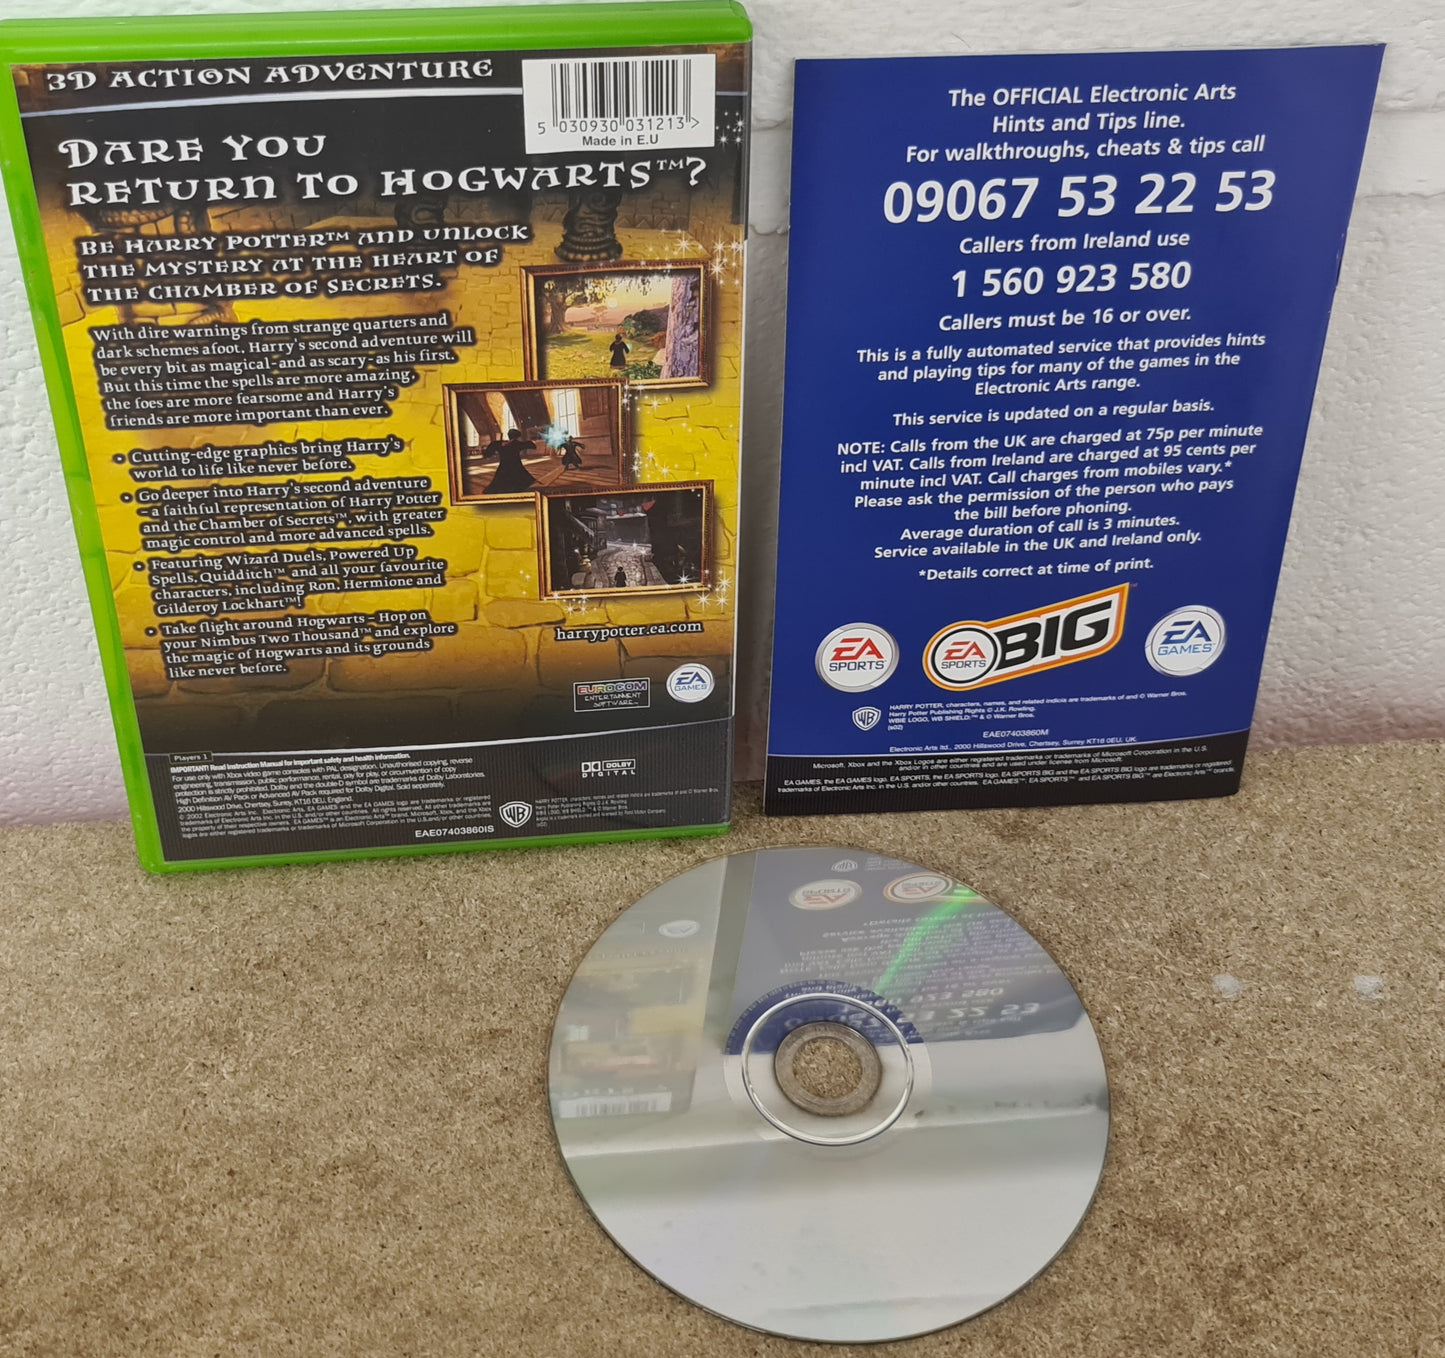 Harry Potter and the Chamber of Secrets Microsoft Xbox Game